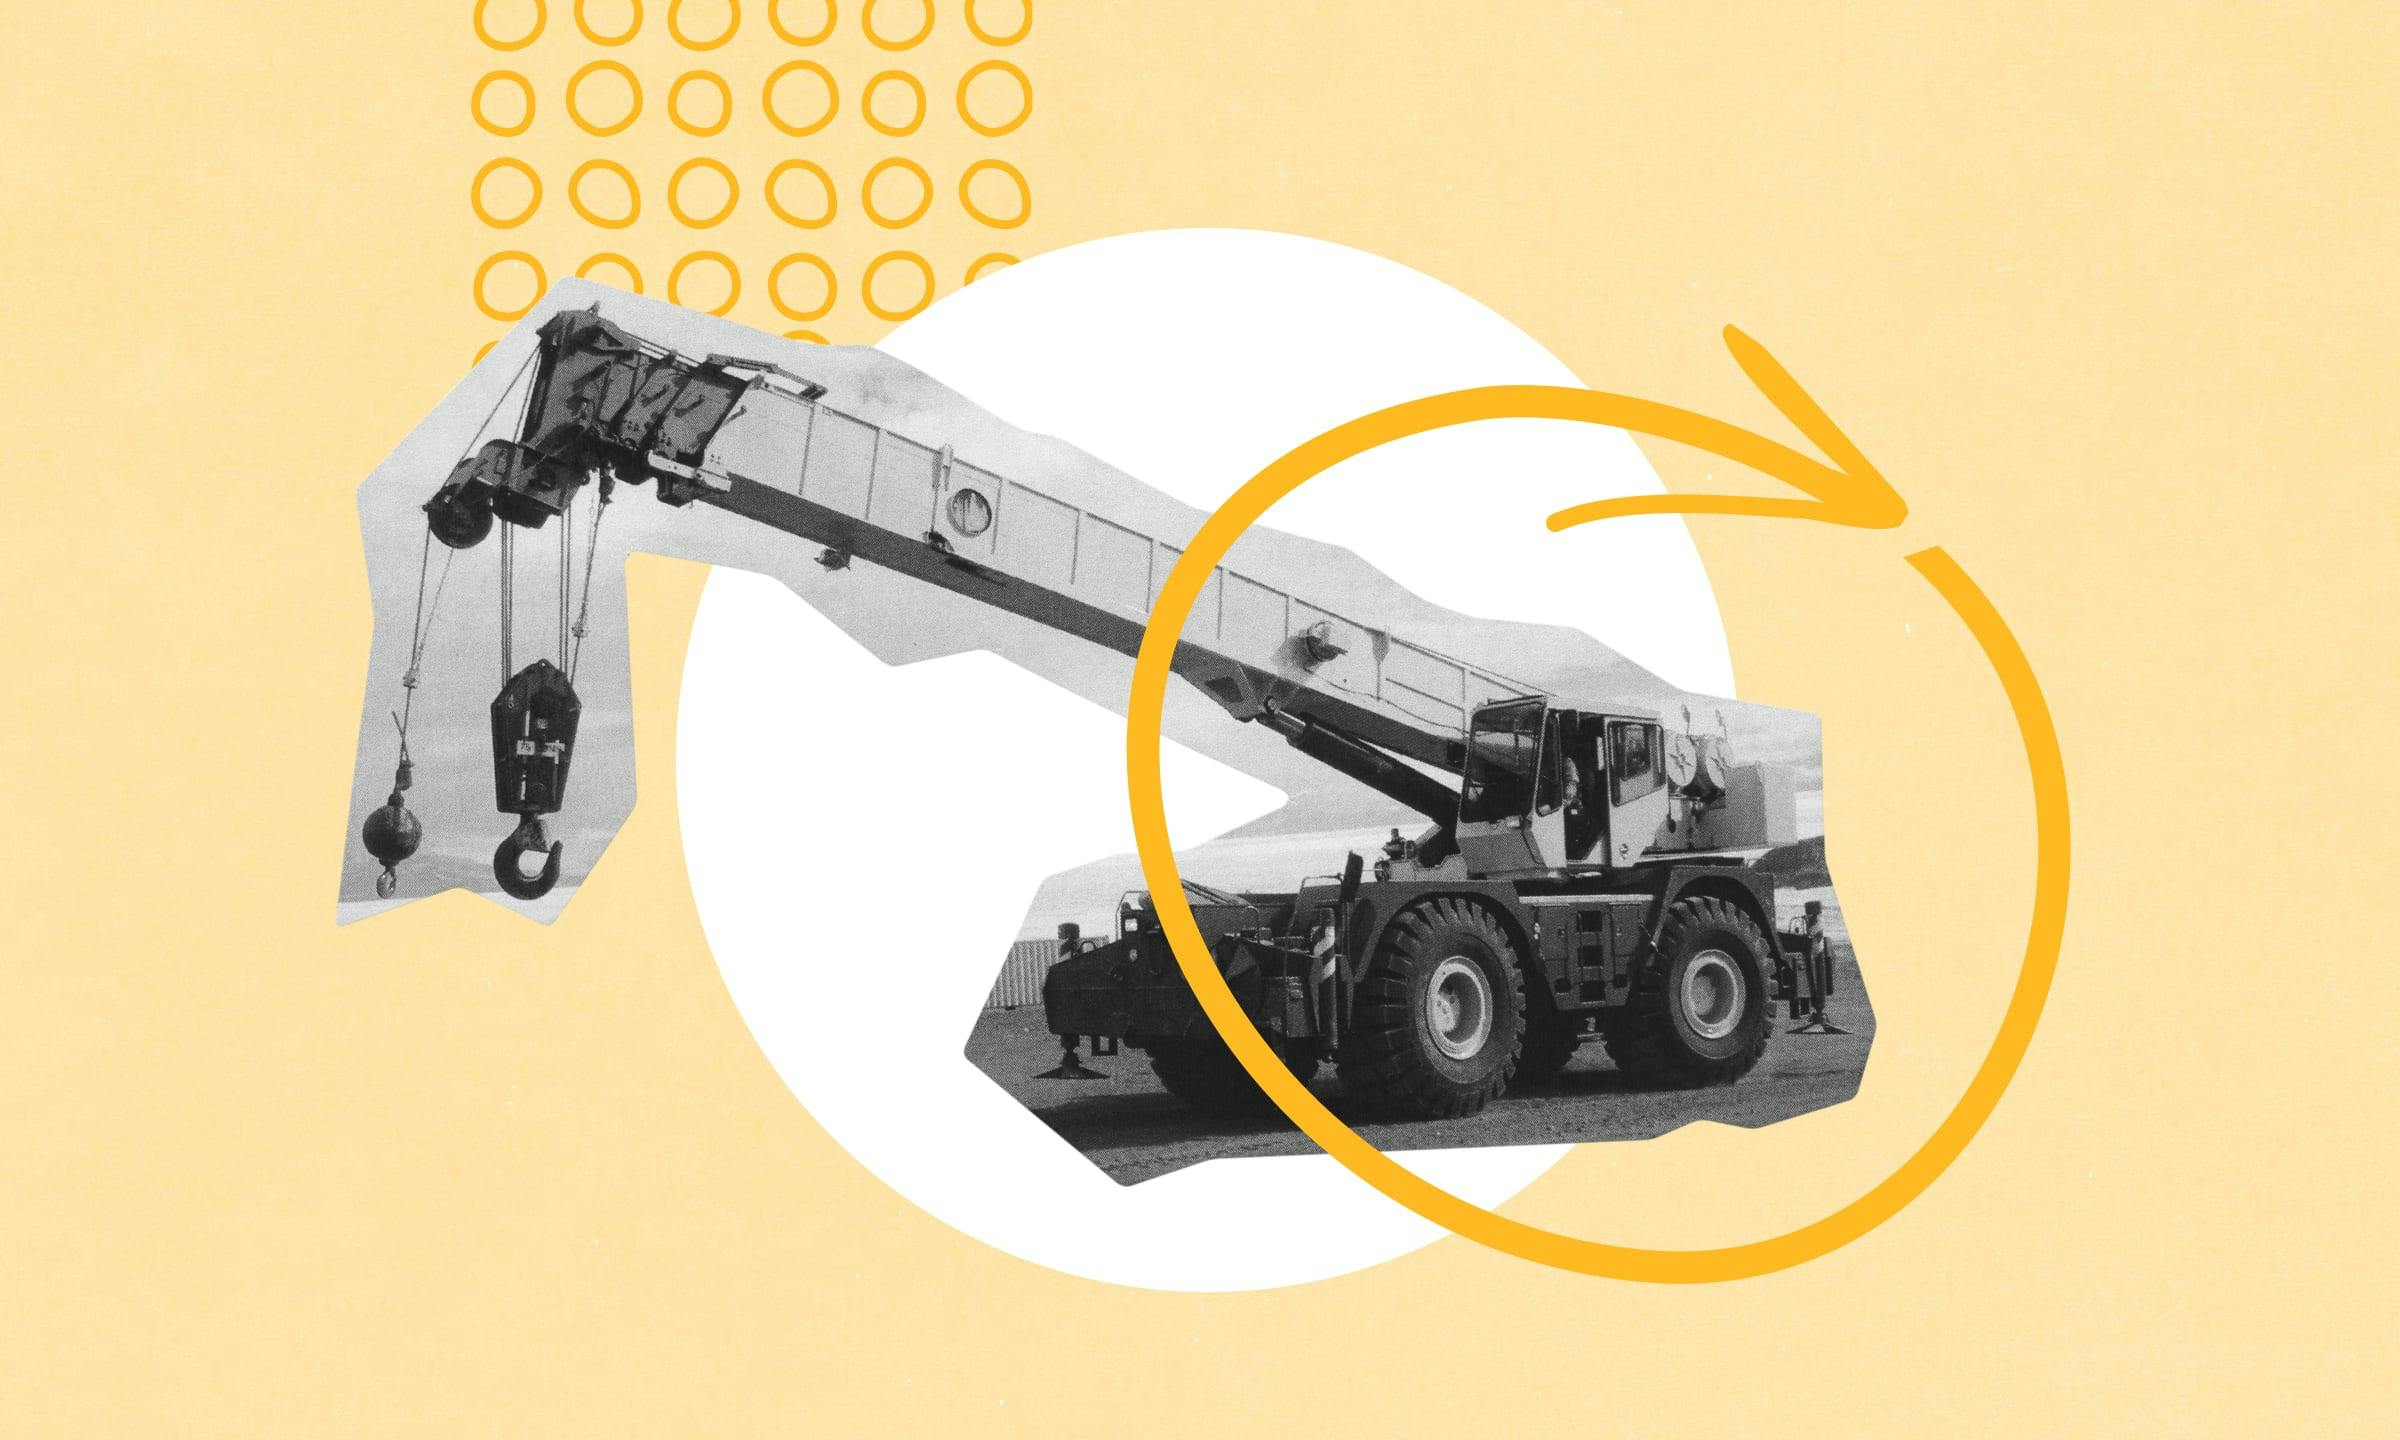 Connecting Product Circularity and Brand in Construction & Heavy Equipment